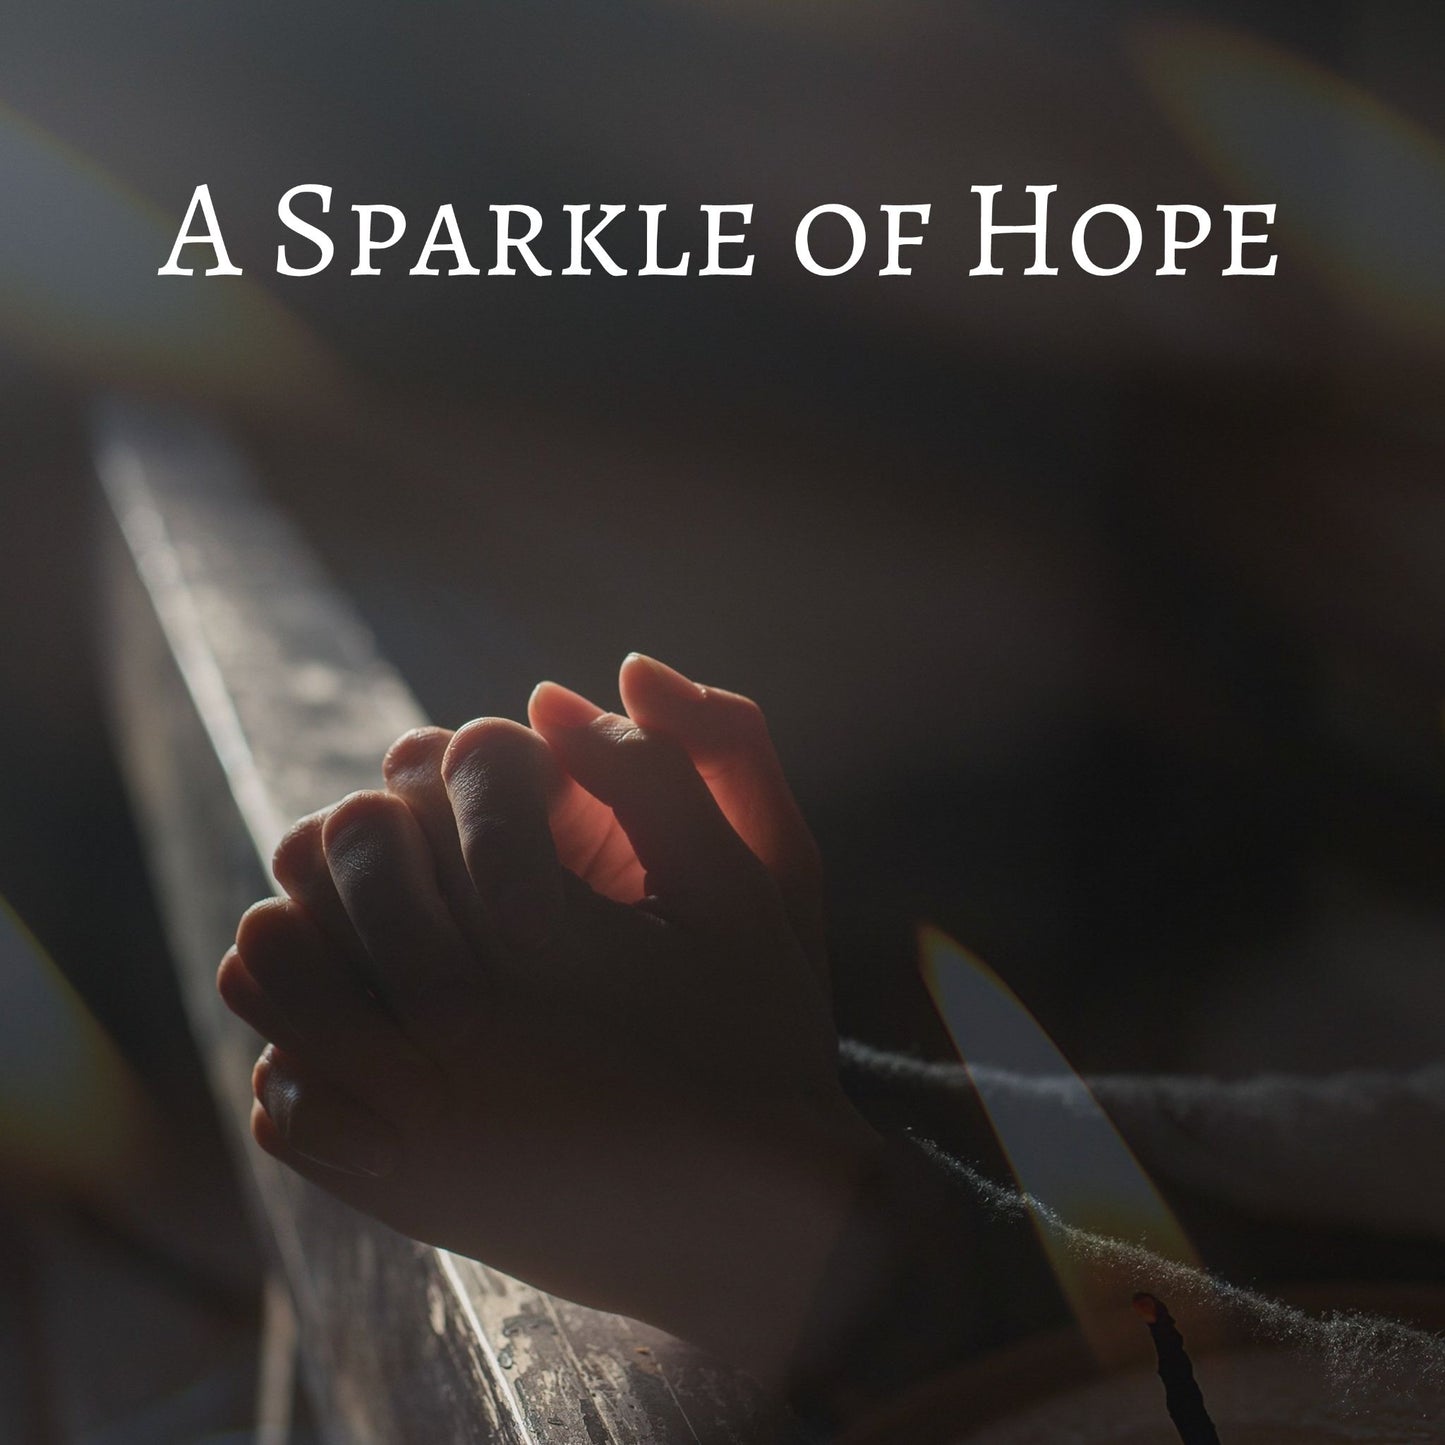 CD Cover of song A Sparkle of Hope